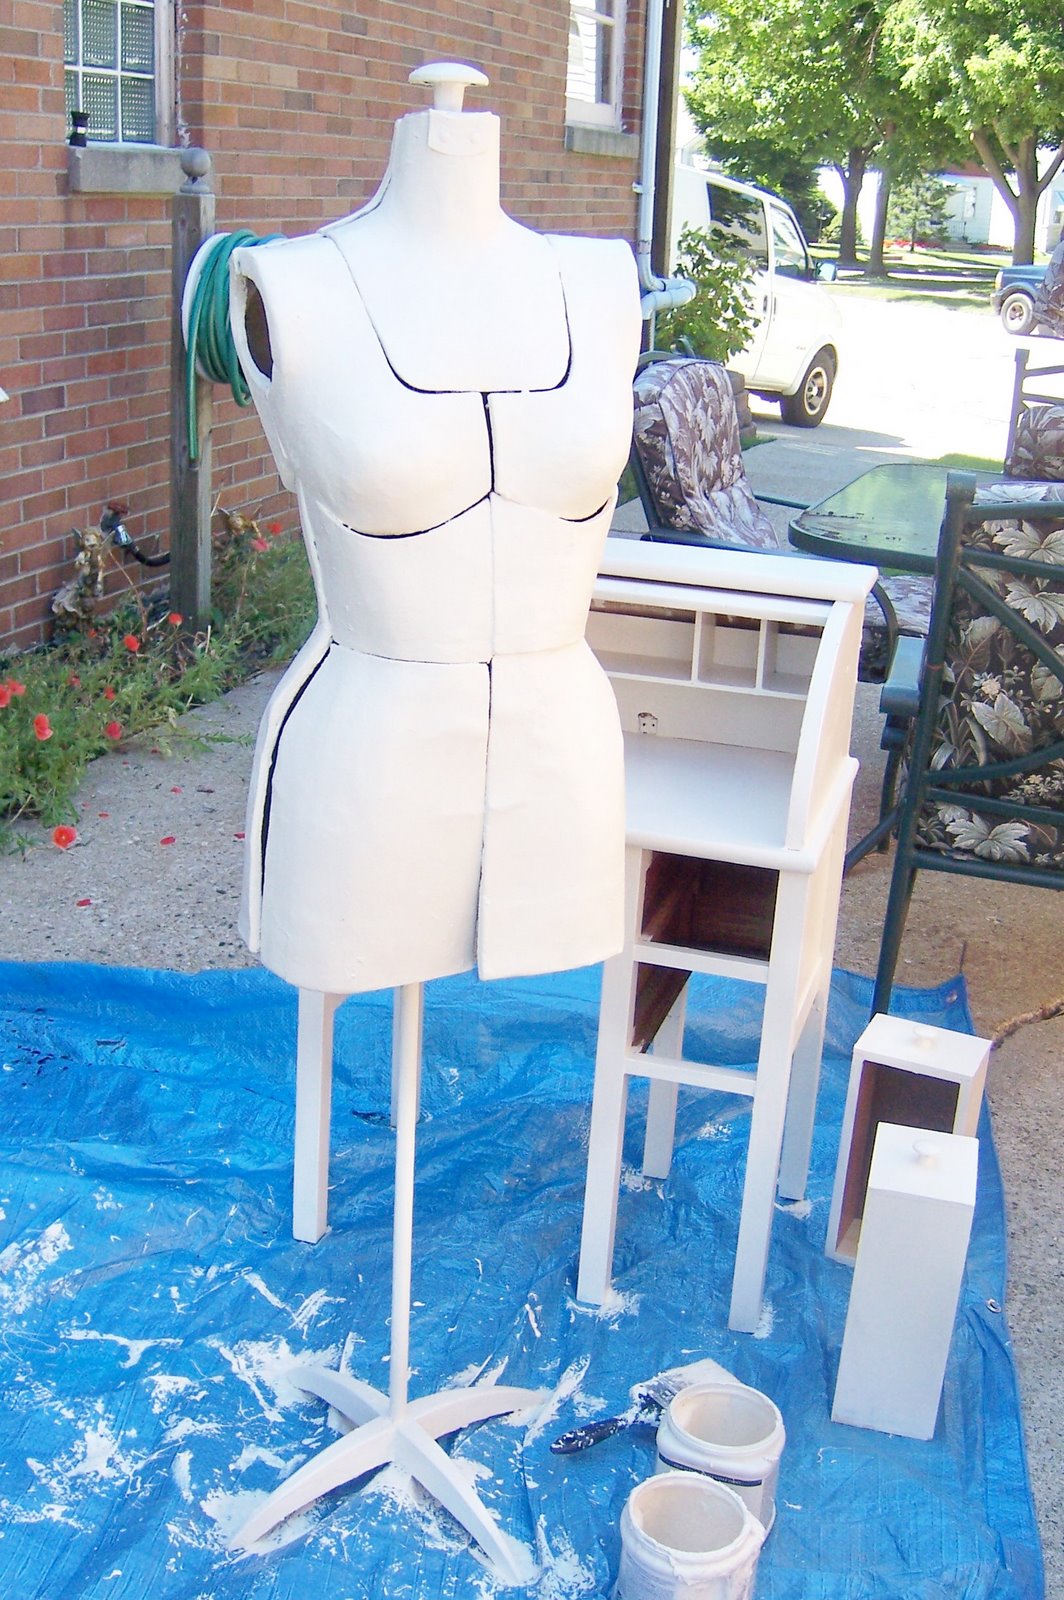 [july+08+painting+mannequin+done.jpg]